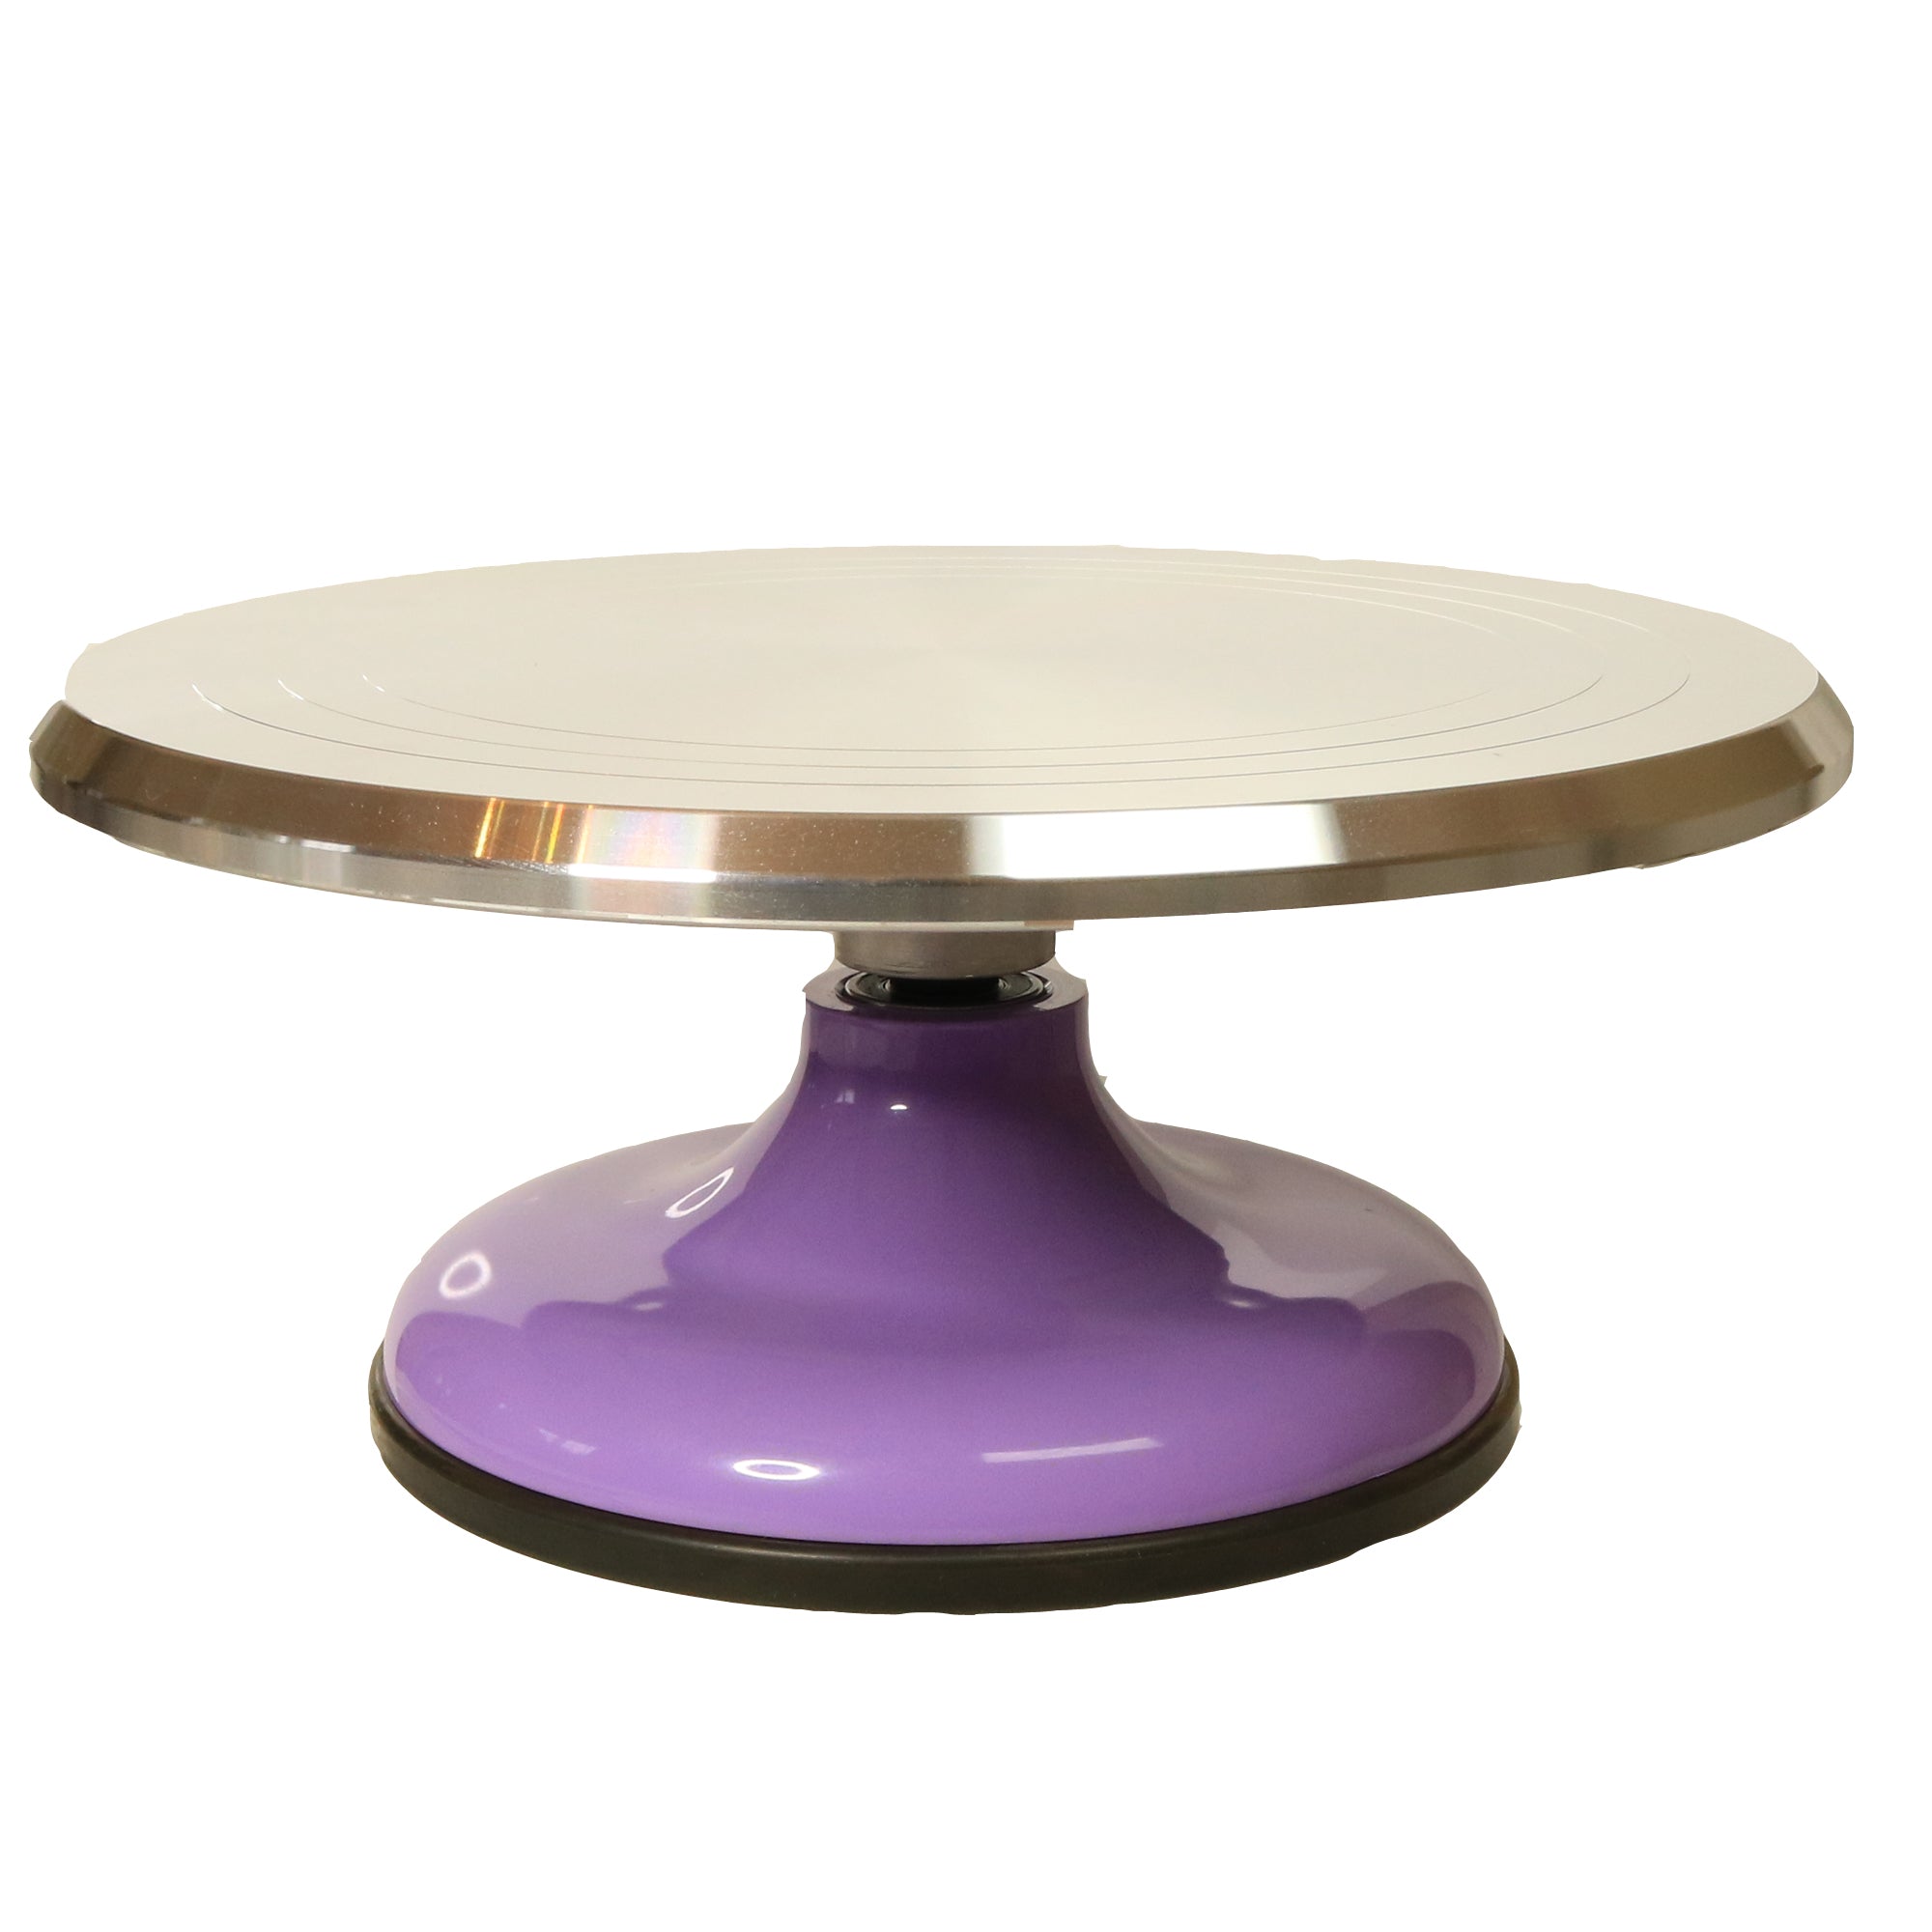  VILLFUL Turntable Base Turntable for Cake Decorating